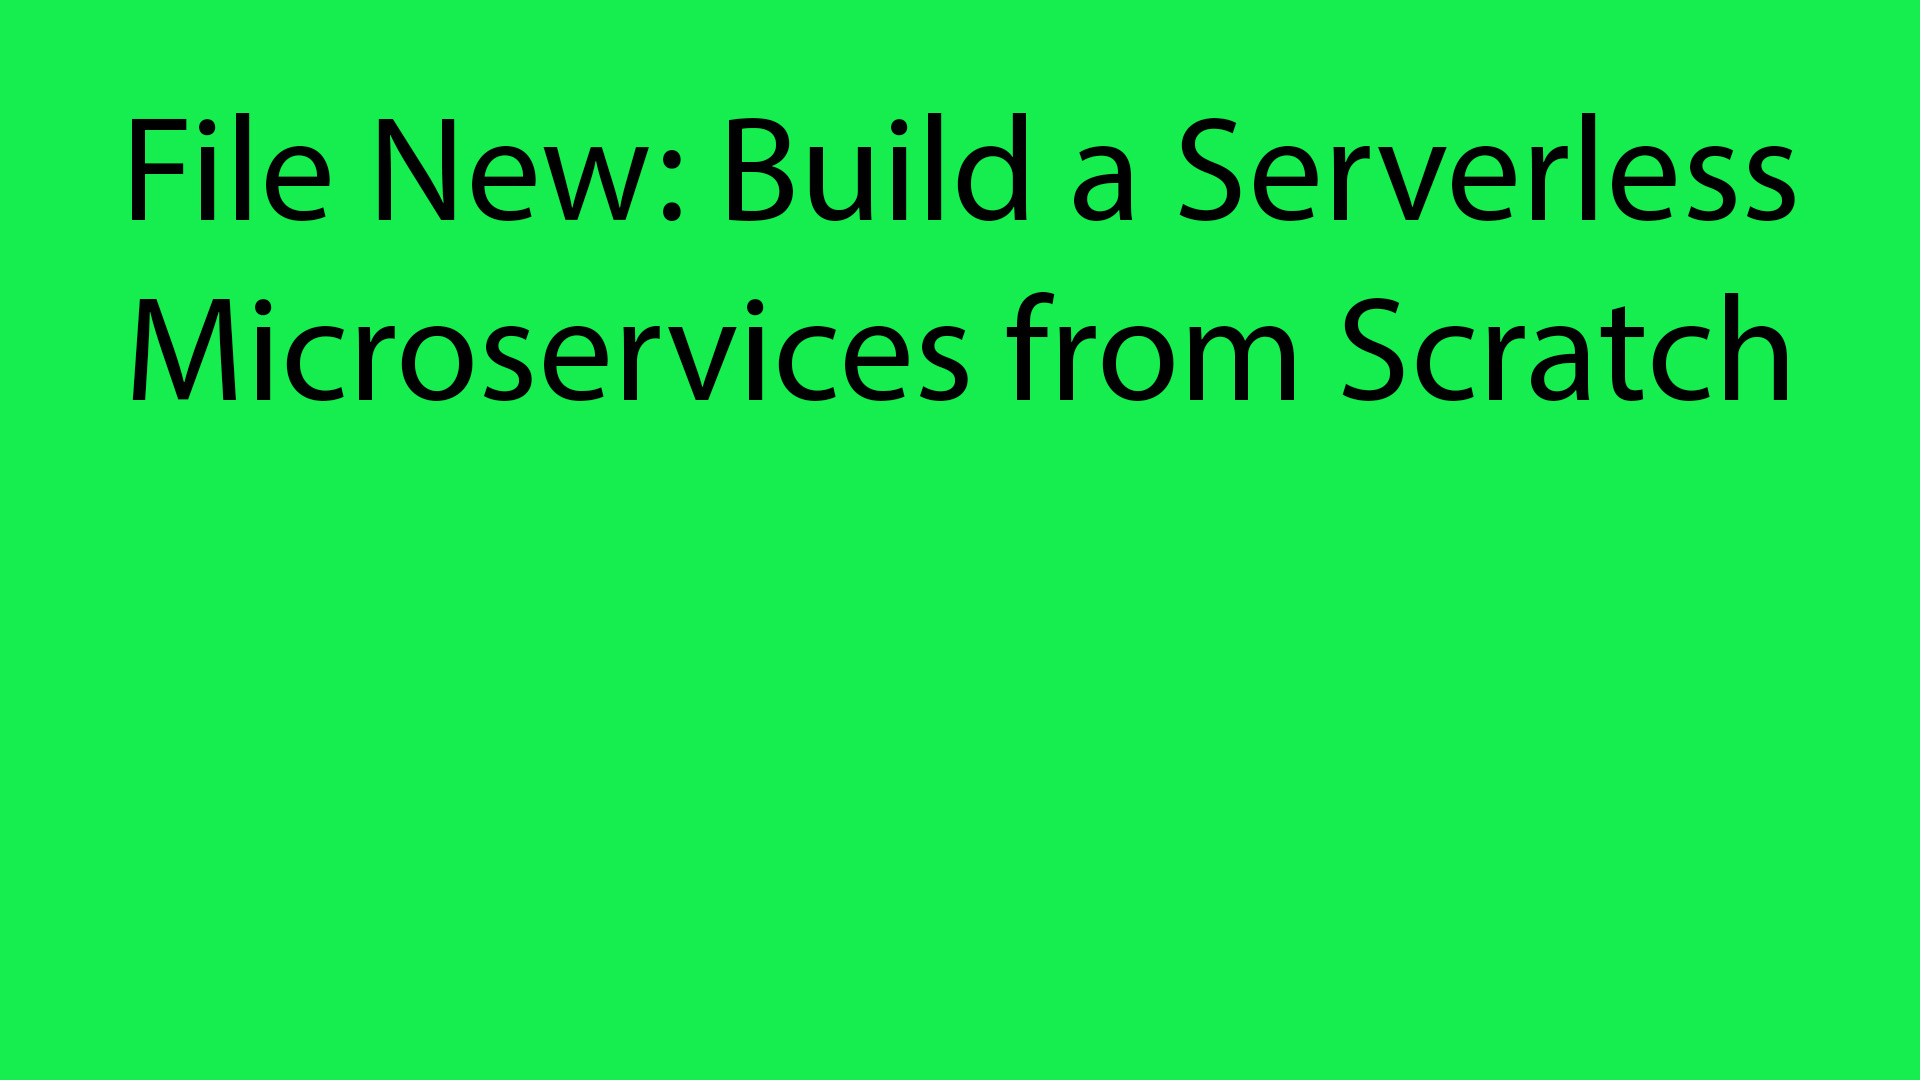 File New: Build a Serverless Microservice from Scratch